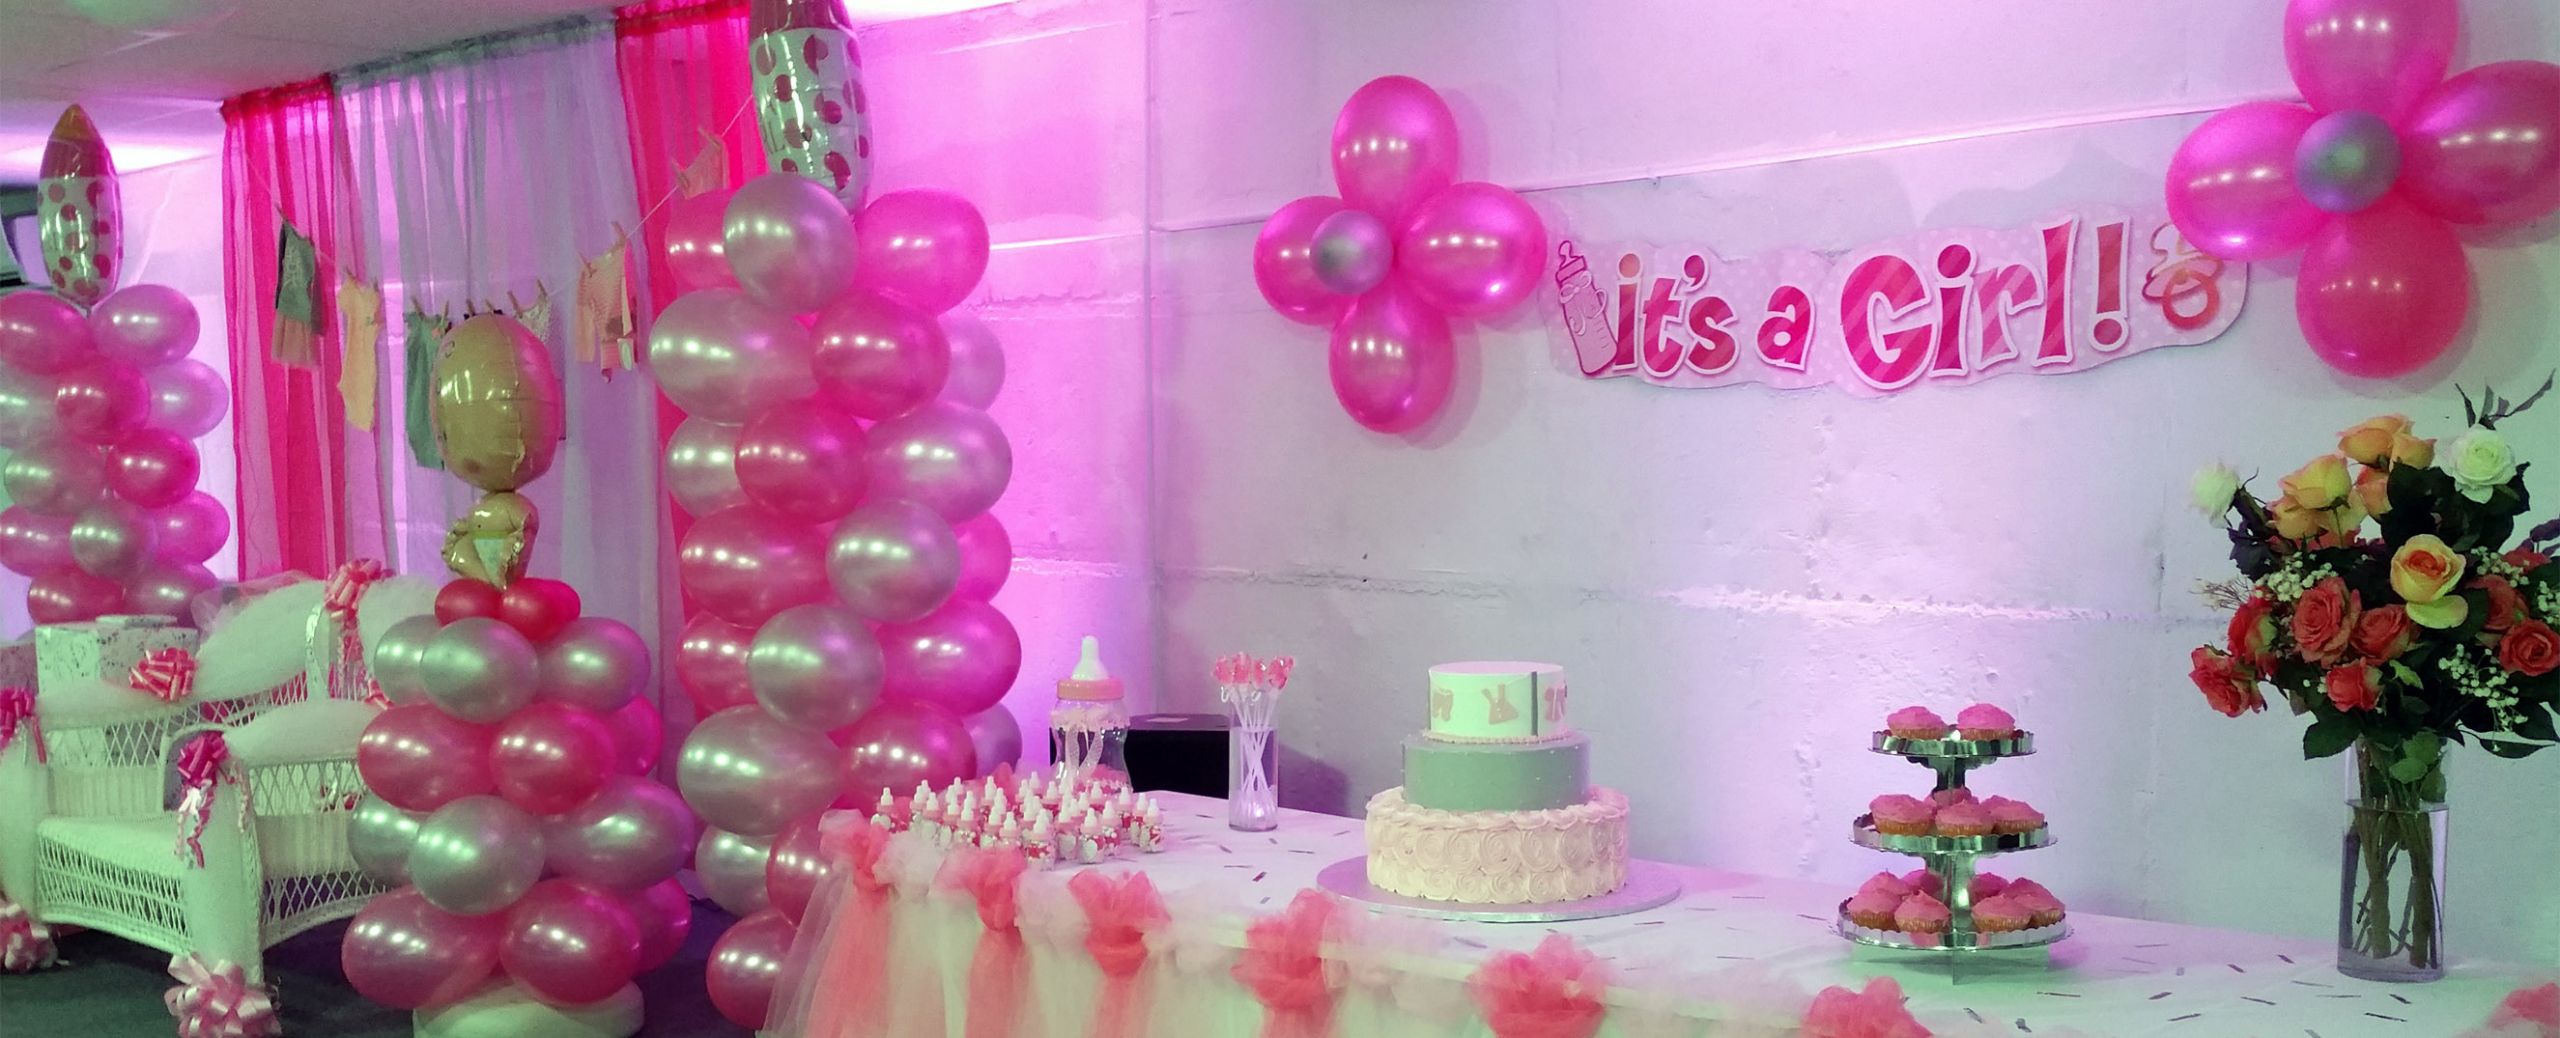 Party Room Rentals For Baby Shower
 girly baby shower BCR Signature Events